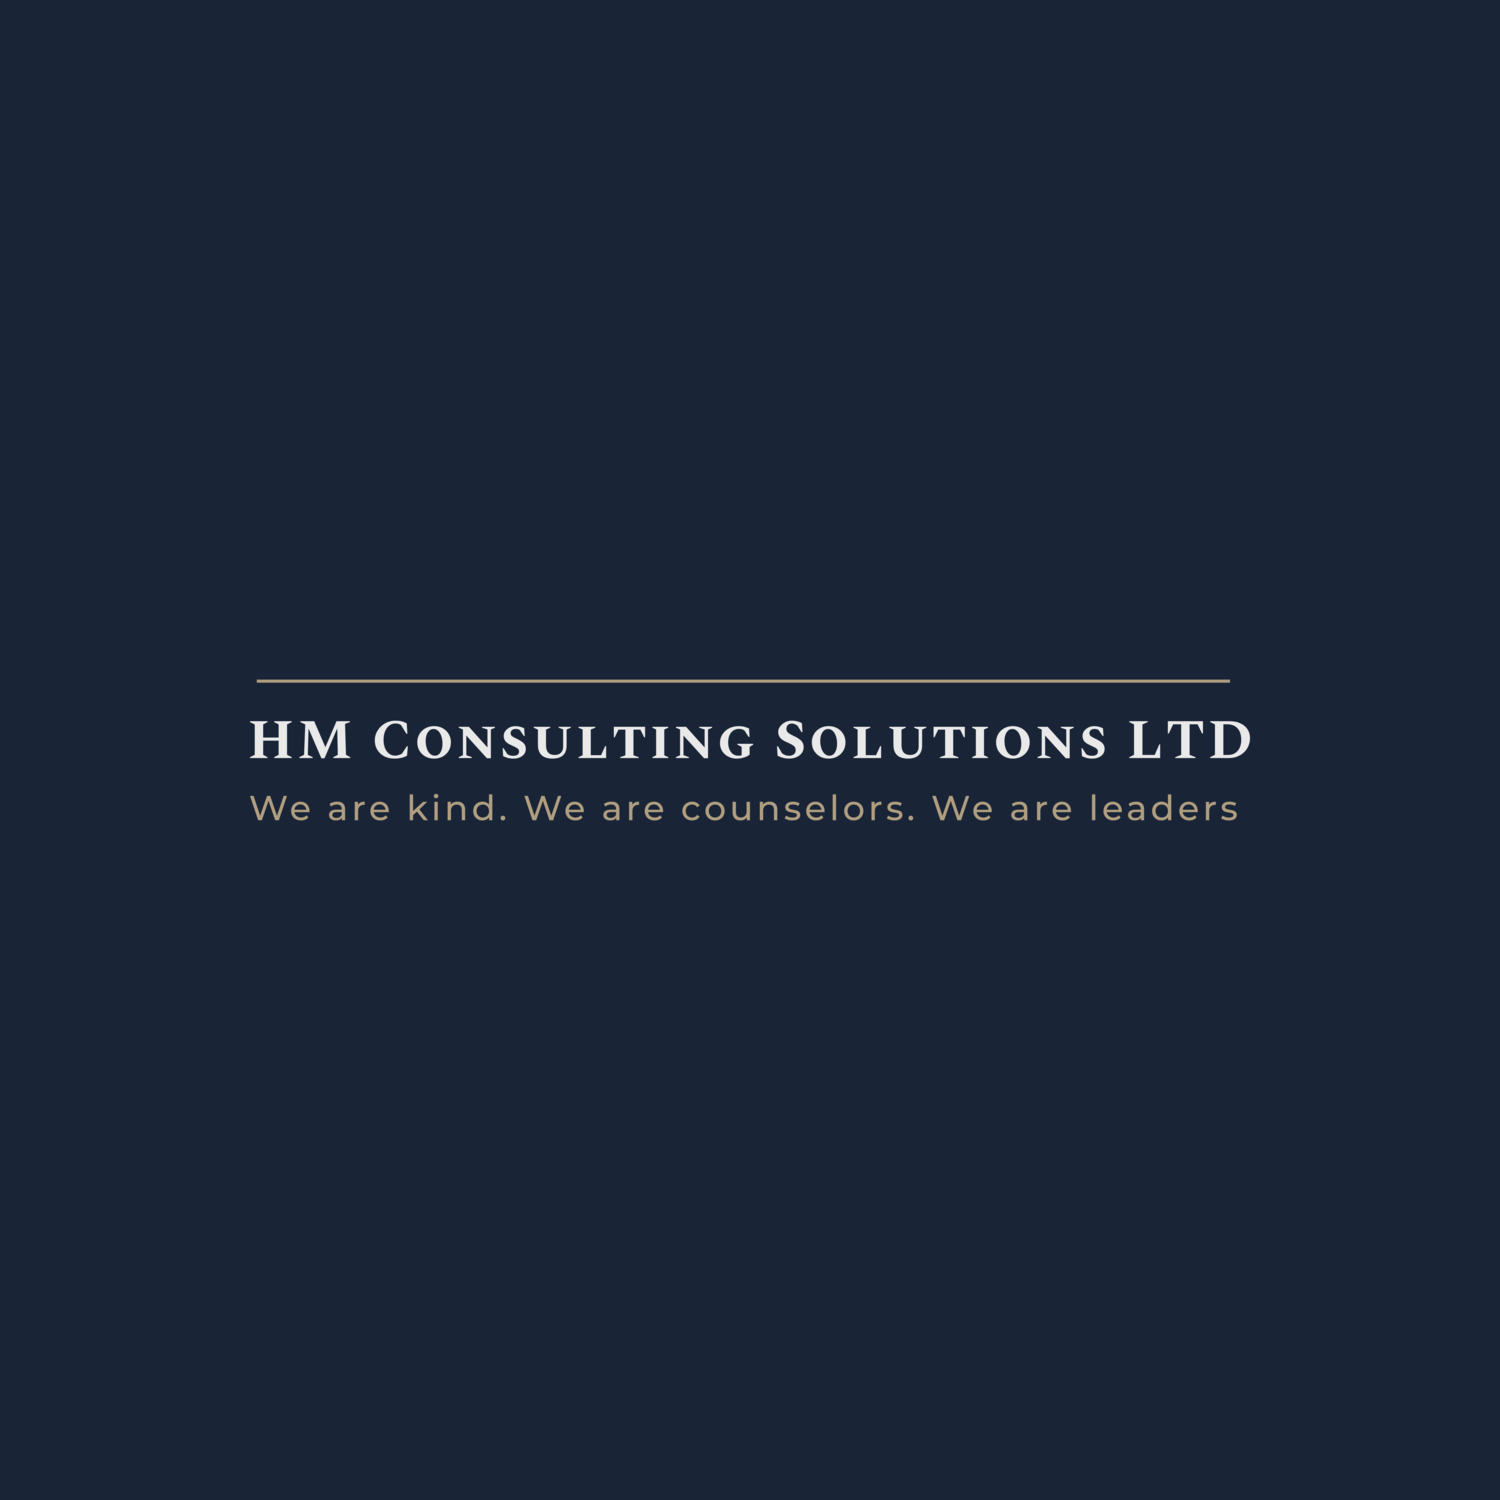 HM Consulting Solutions LTD